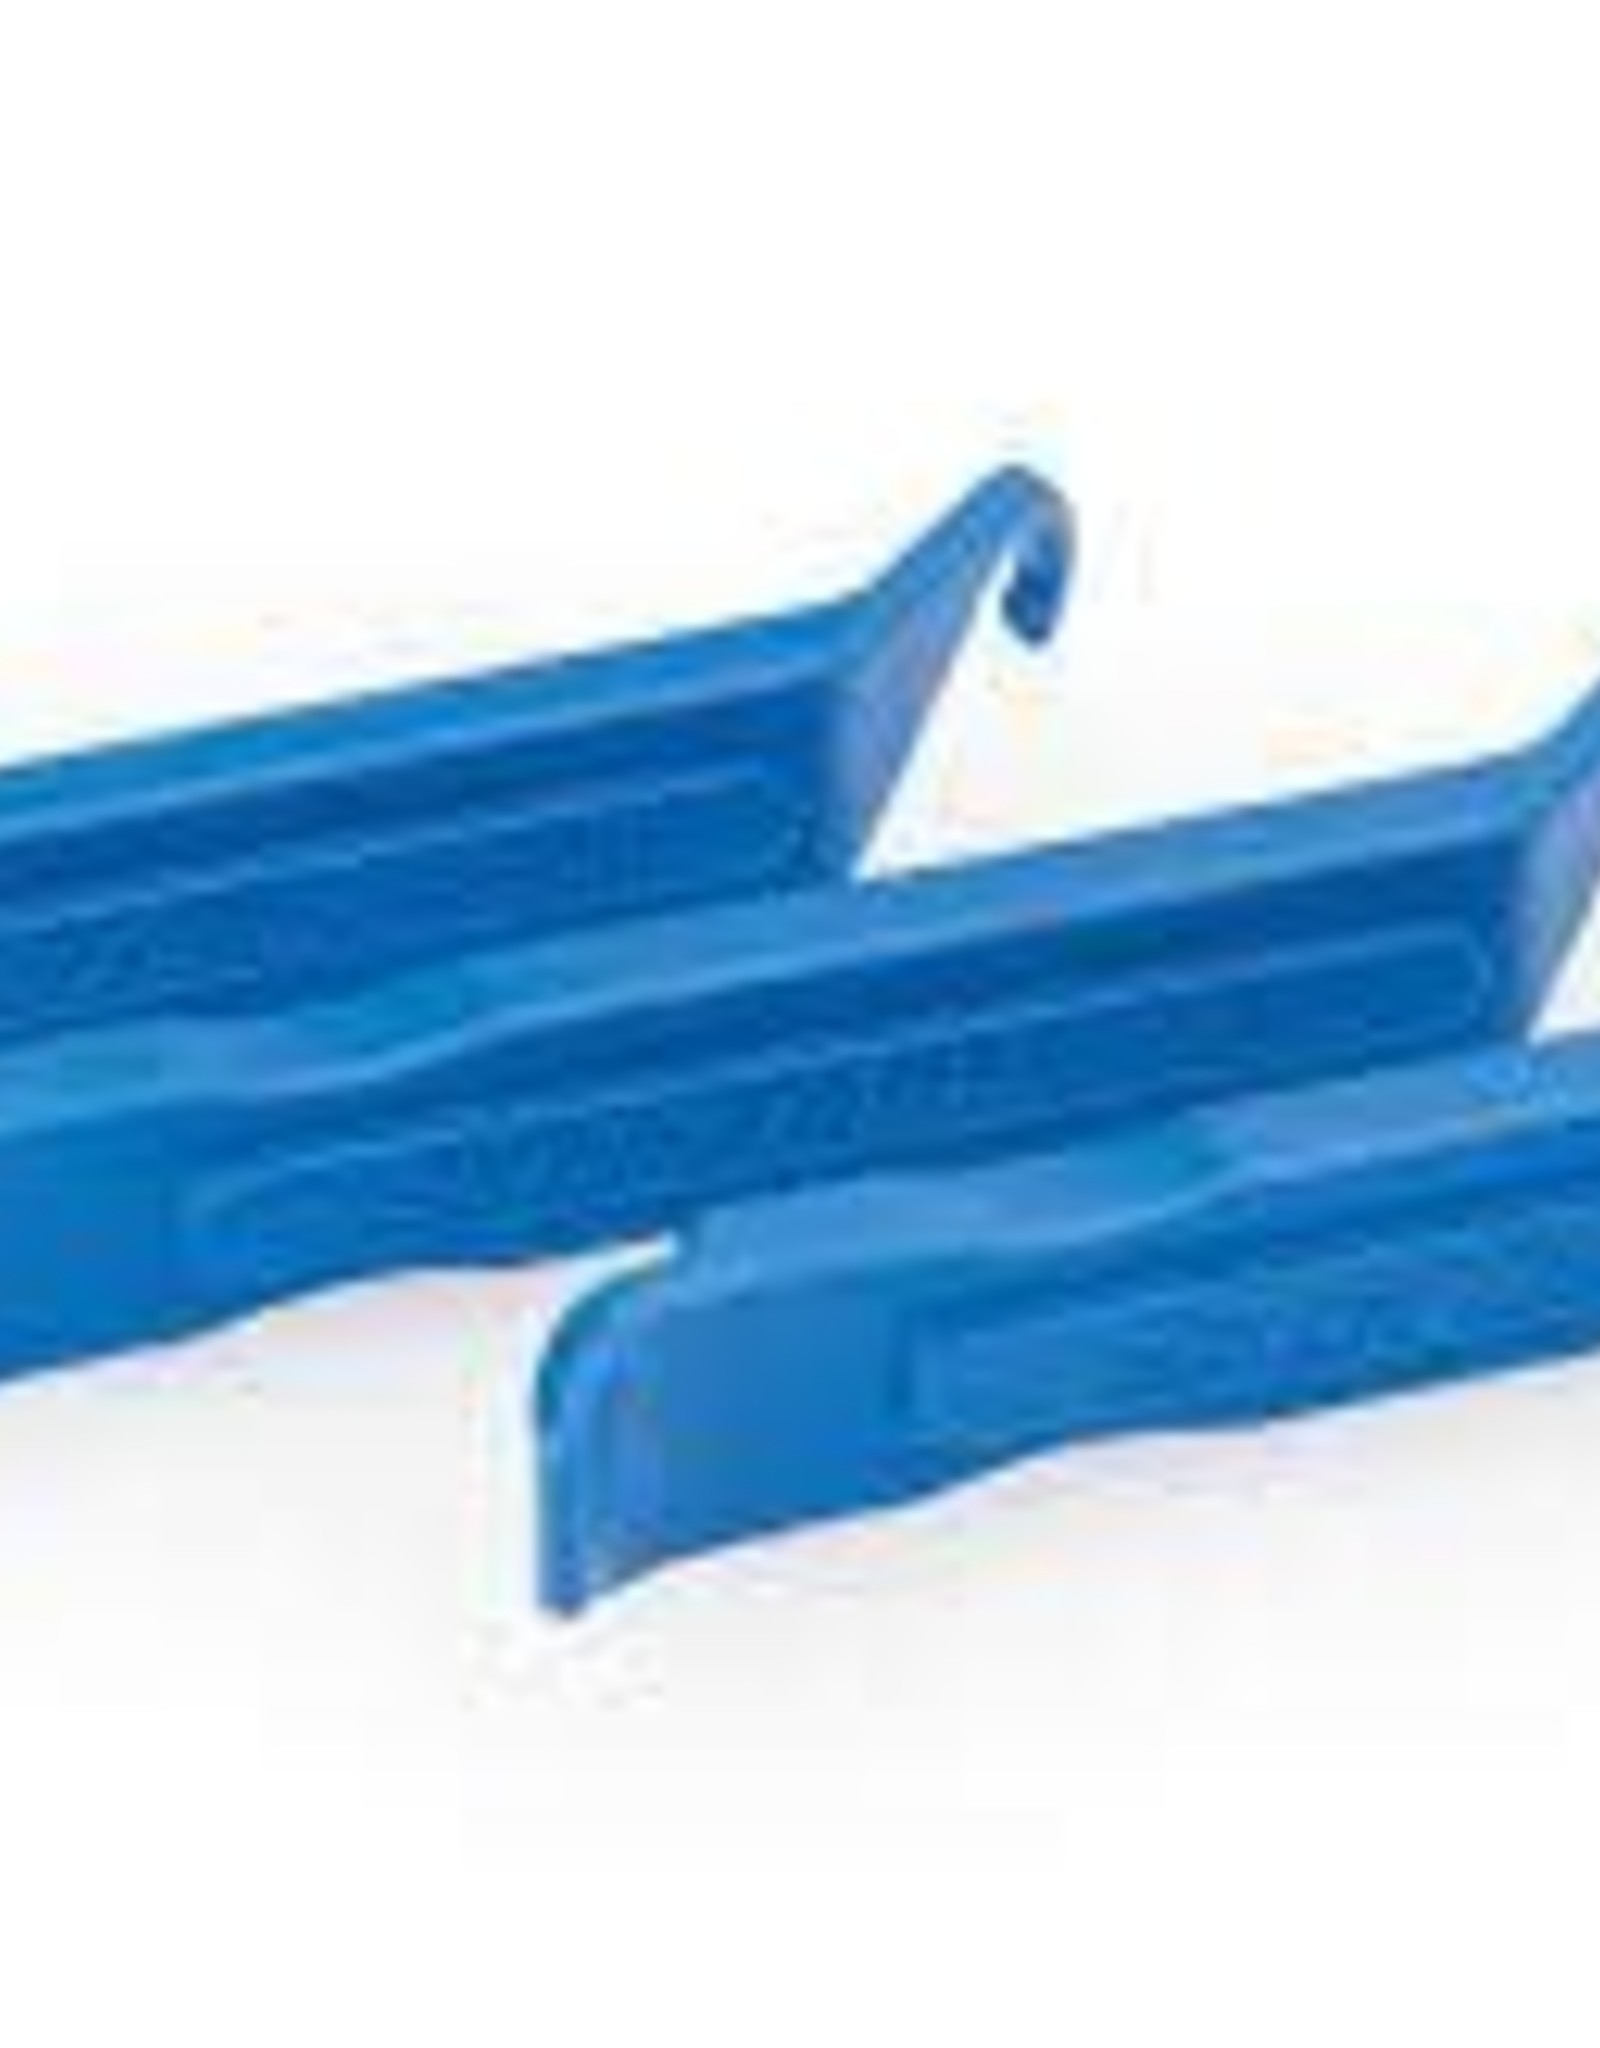 Park Tool Park Tool, TL-1.2, Tire levers, Set of 3 on header card